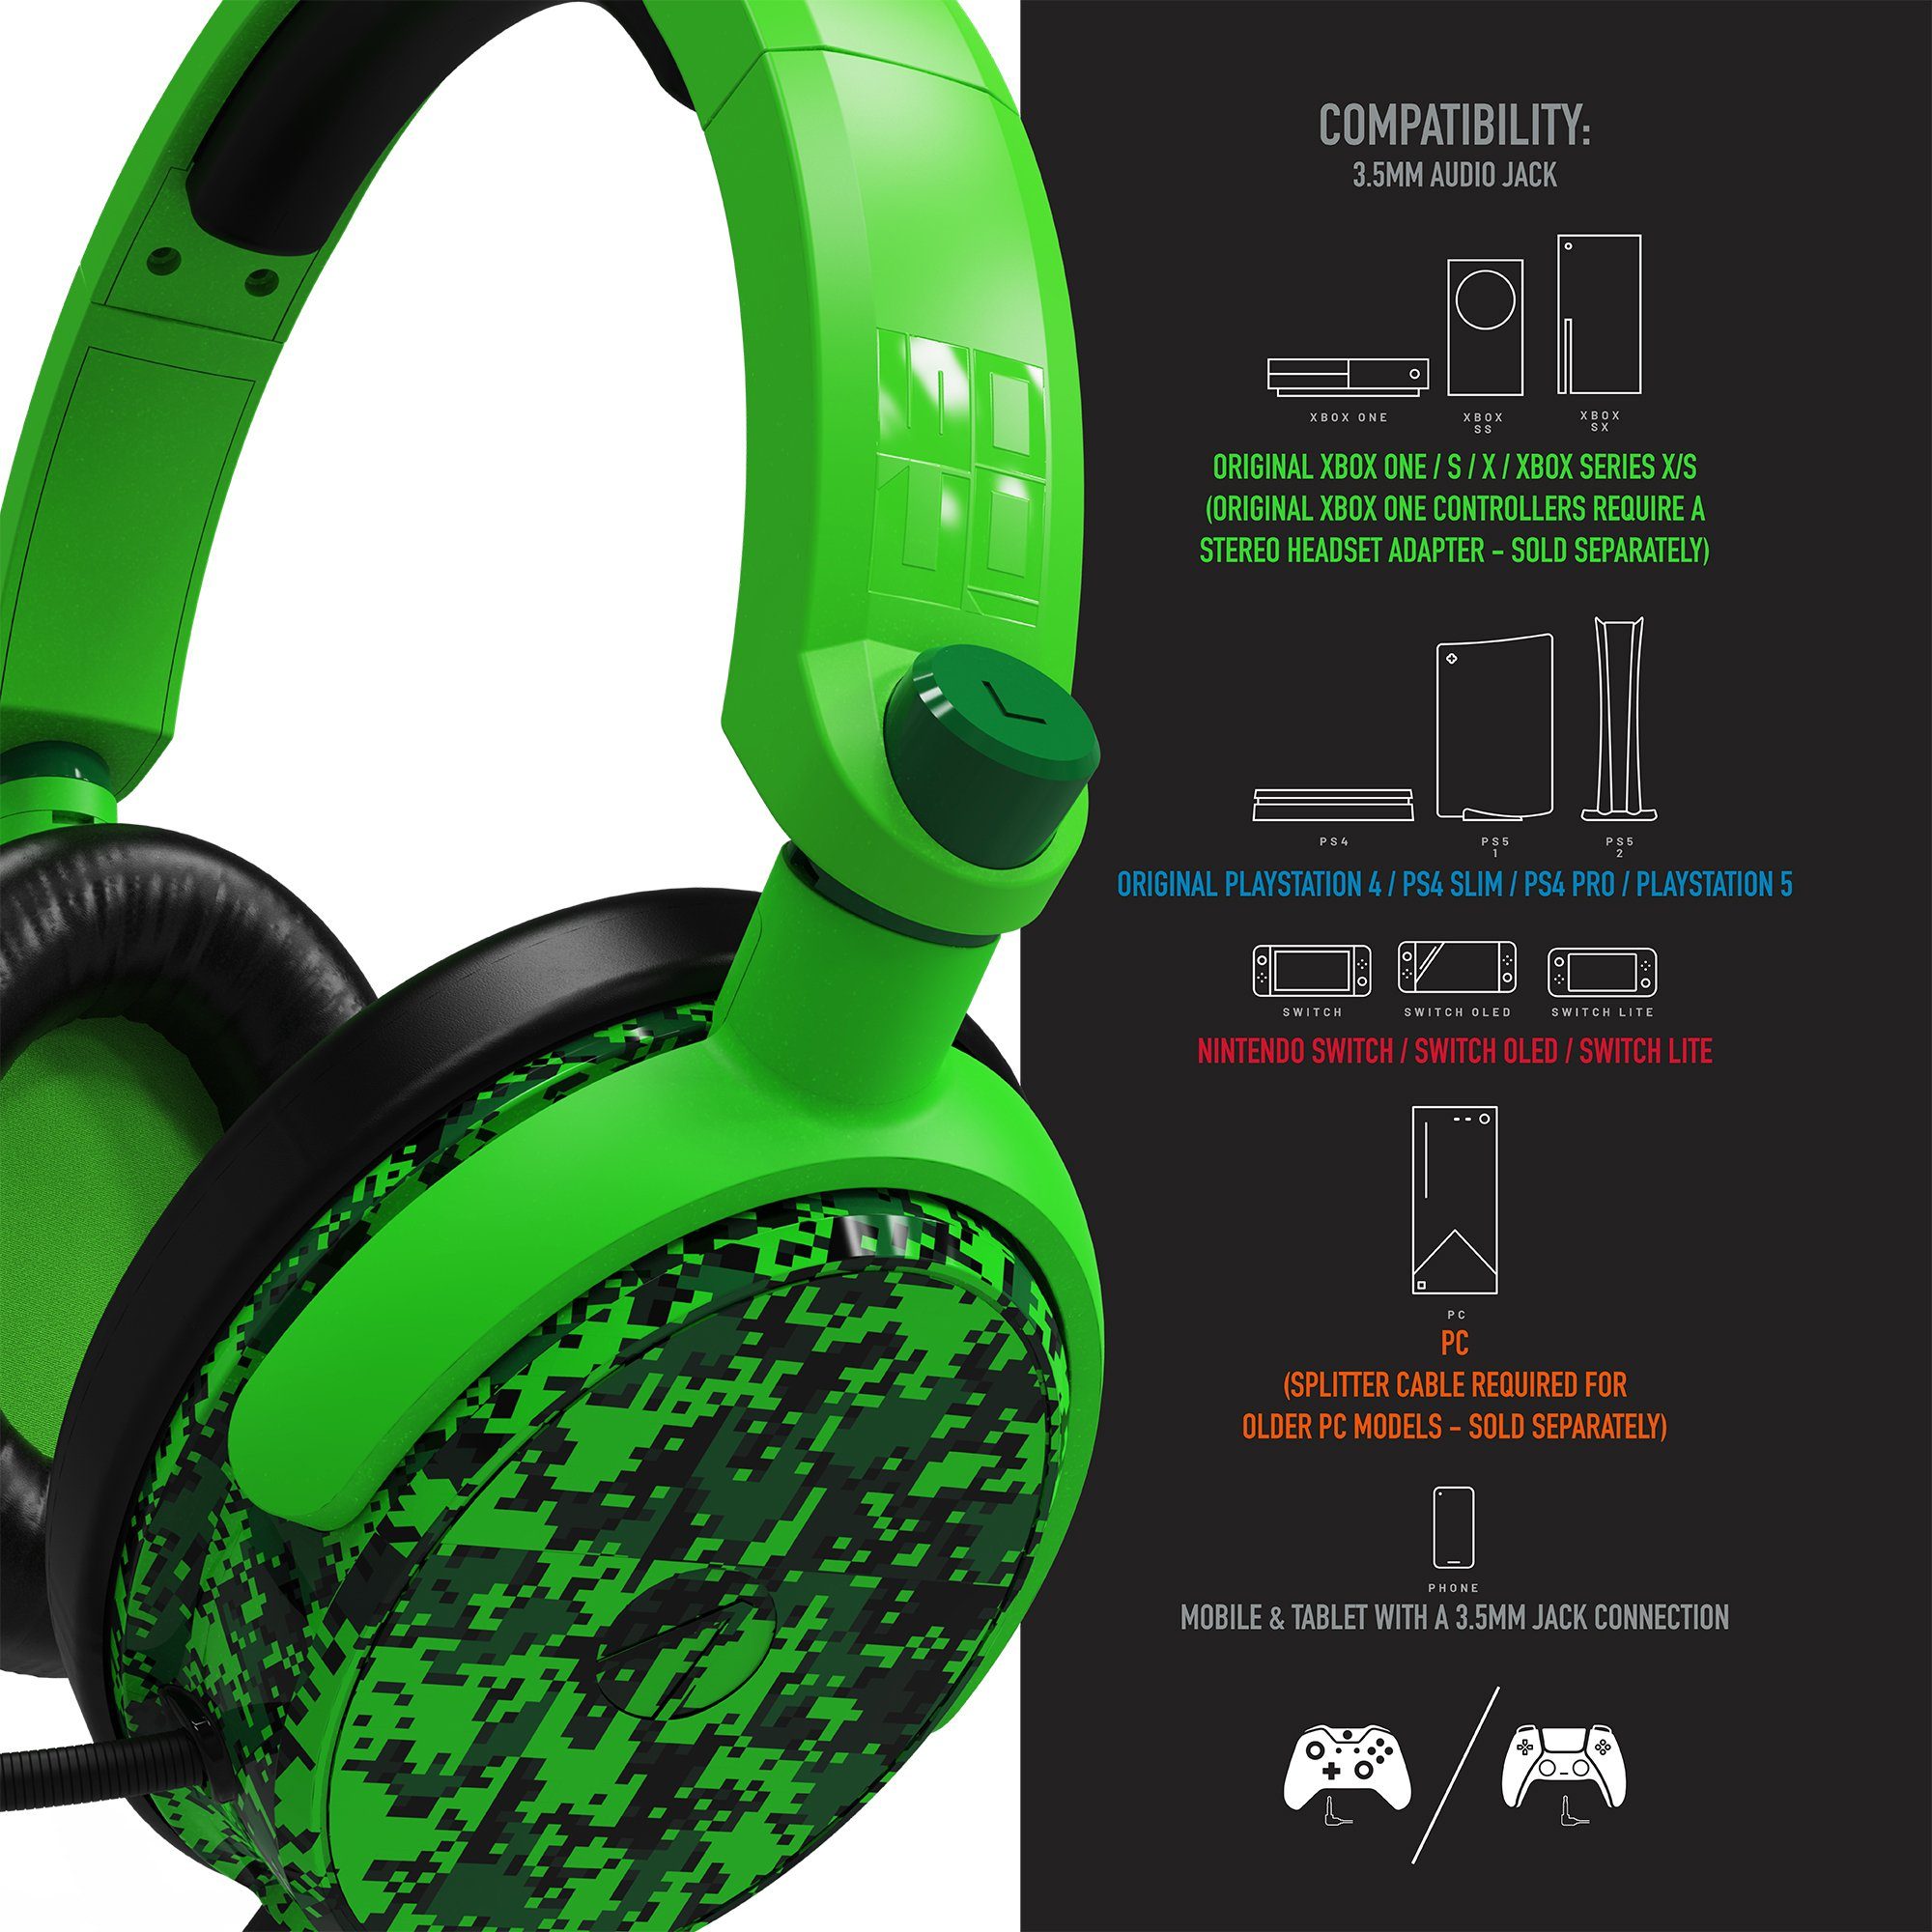 Gaming Camo Multiformat Headset camouflage Stealth Gaming-Headset C6-100 grün